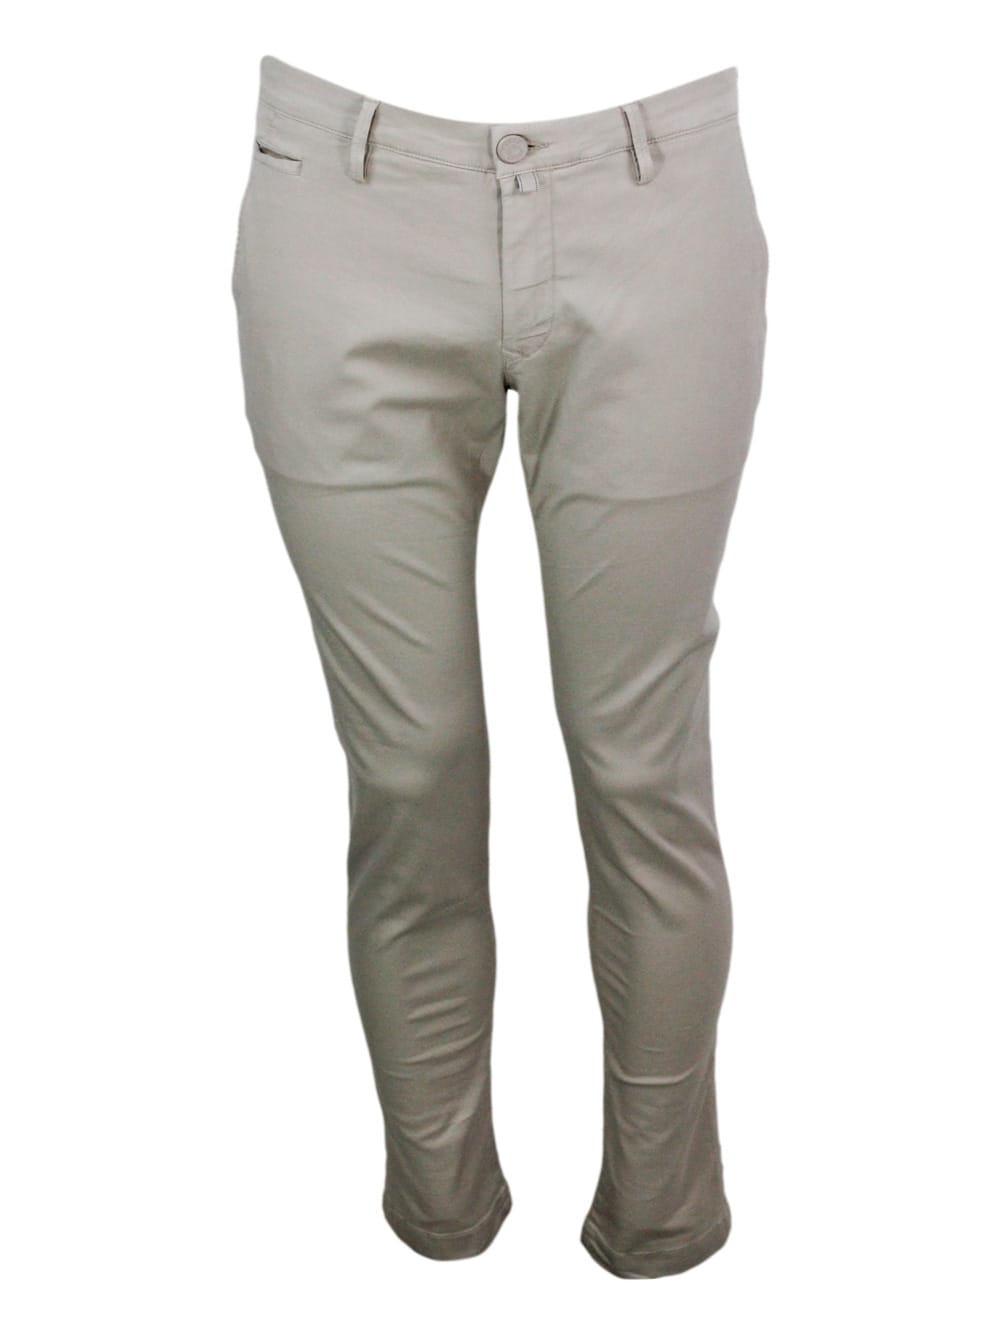 Luxury Edition Bobby Chino Trousers In Soft Stretch Cotton With Slant Pockets With Zip And Button Closure And Lacquered Button